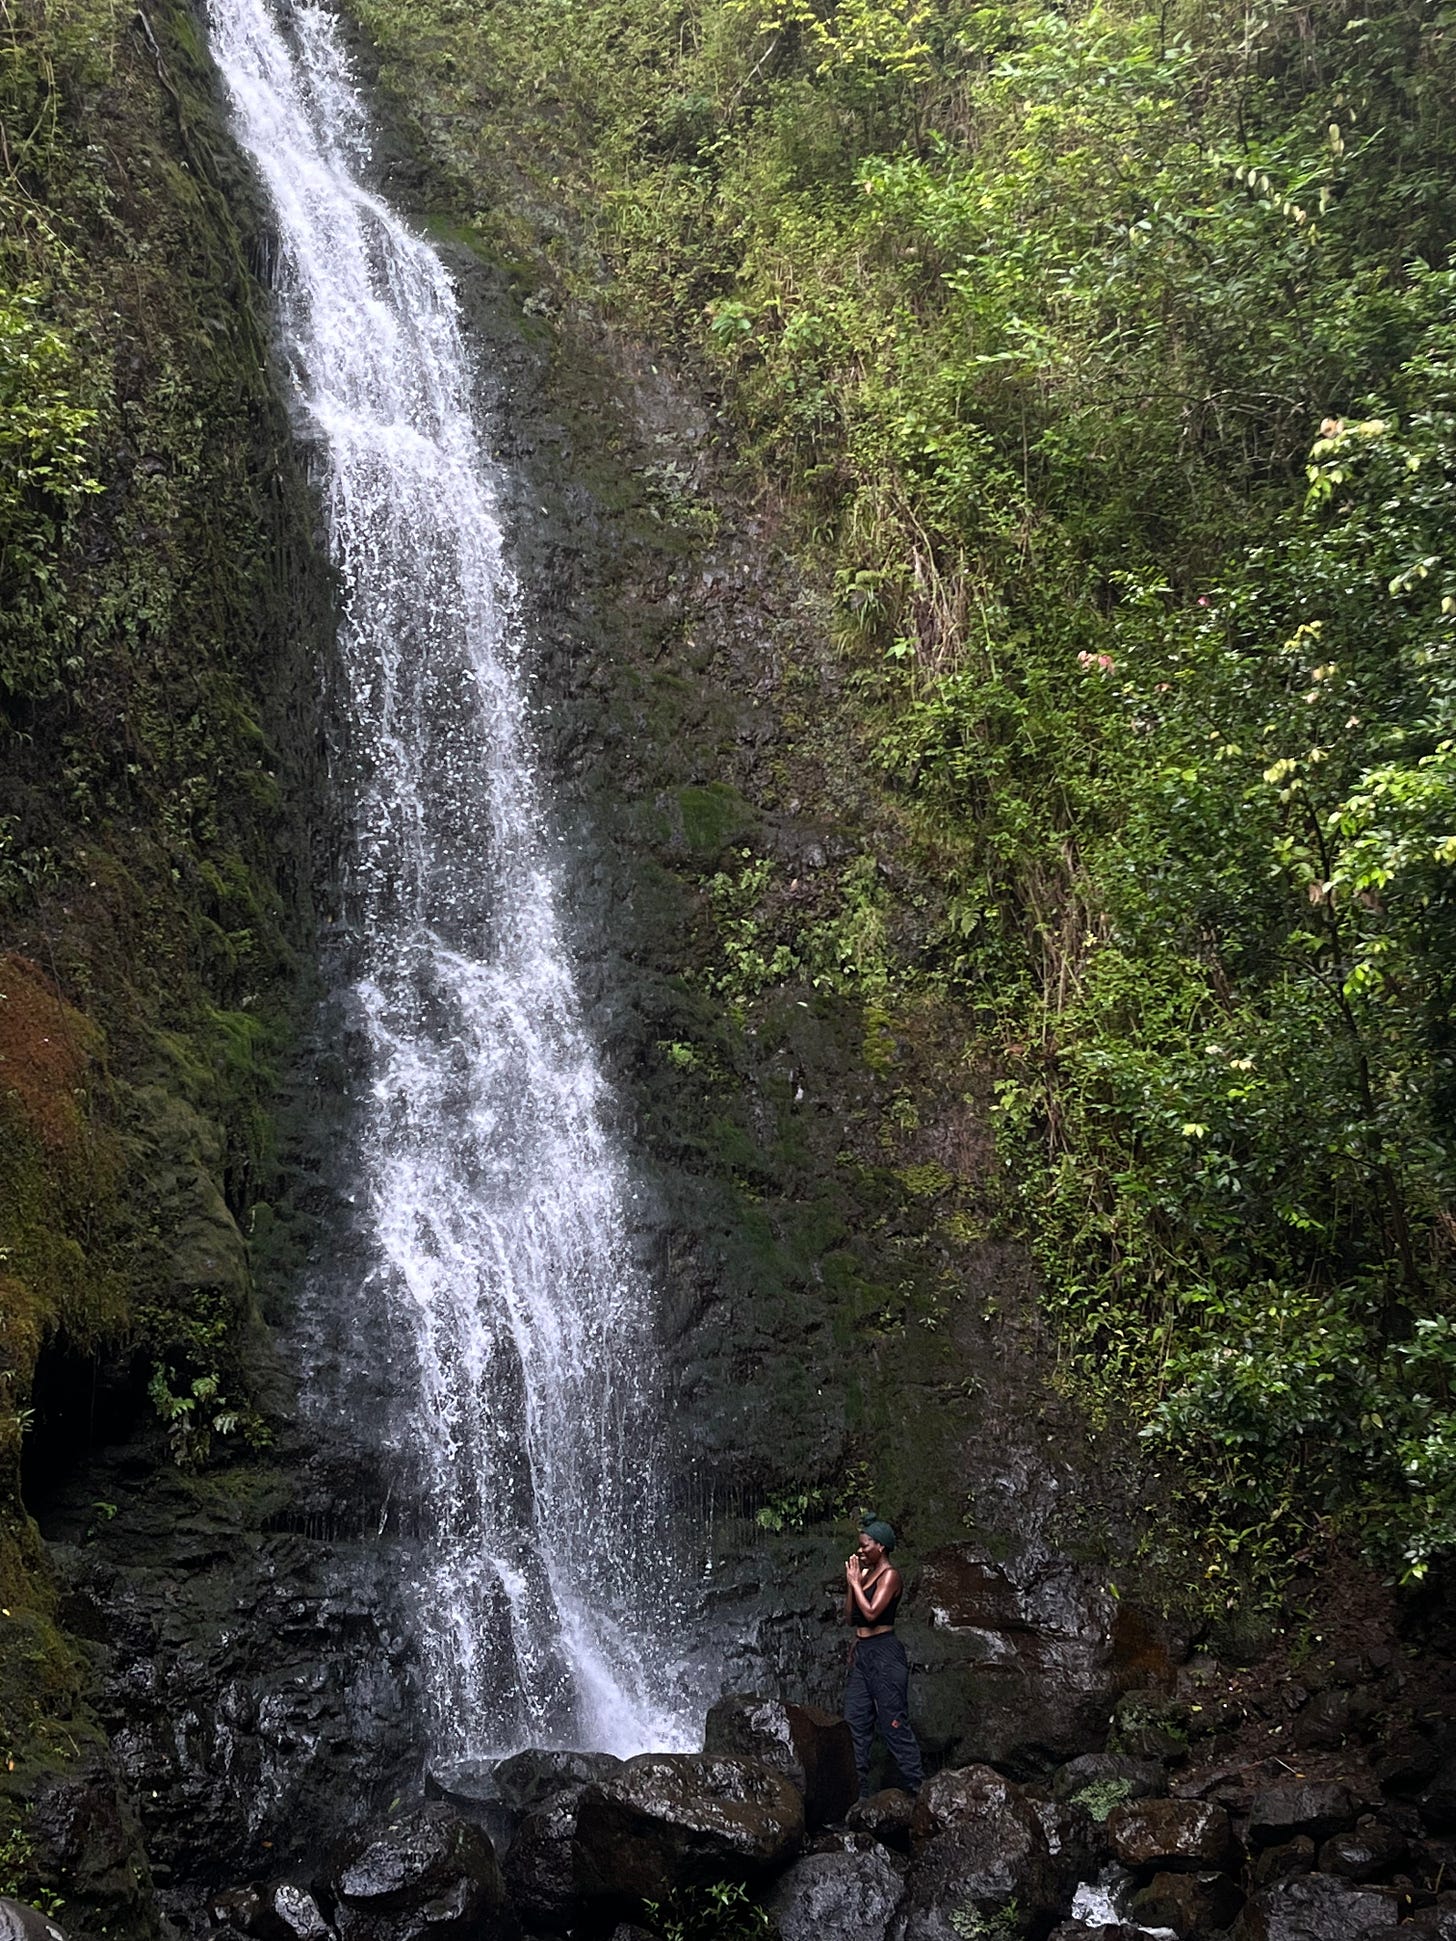 A photo of a woman smiling toward a steep waterfall in Hawaii with palms faced together